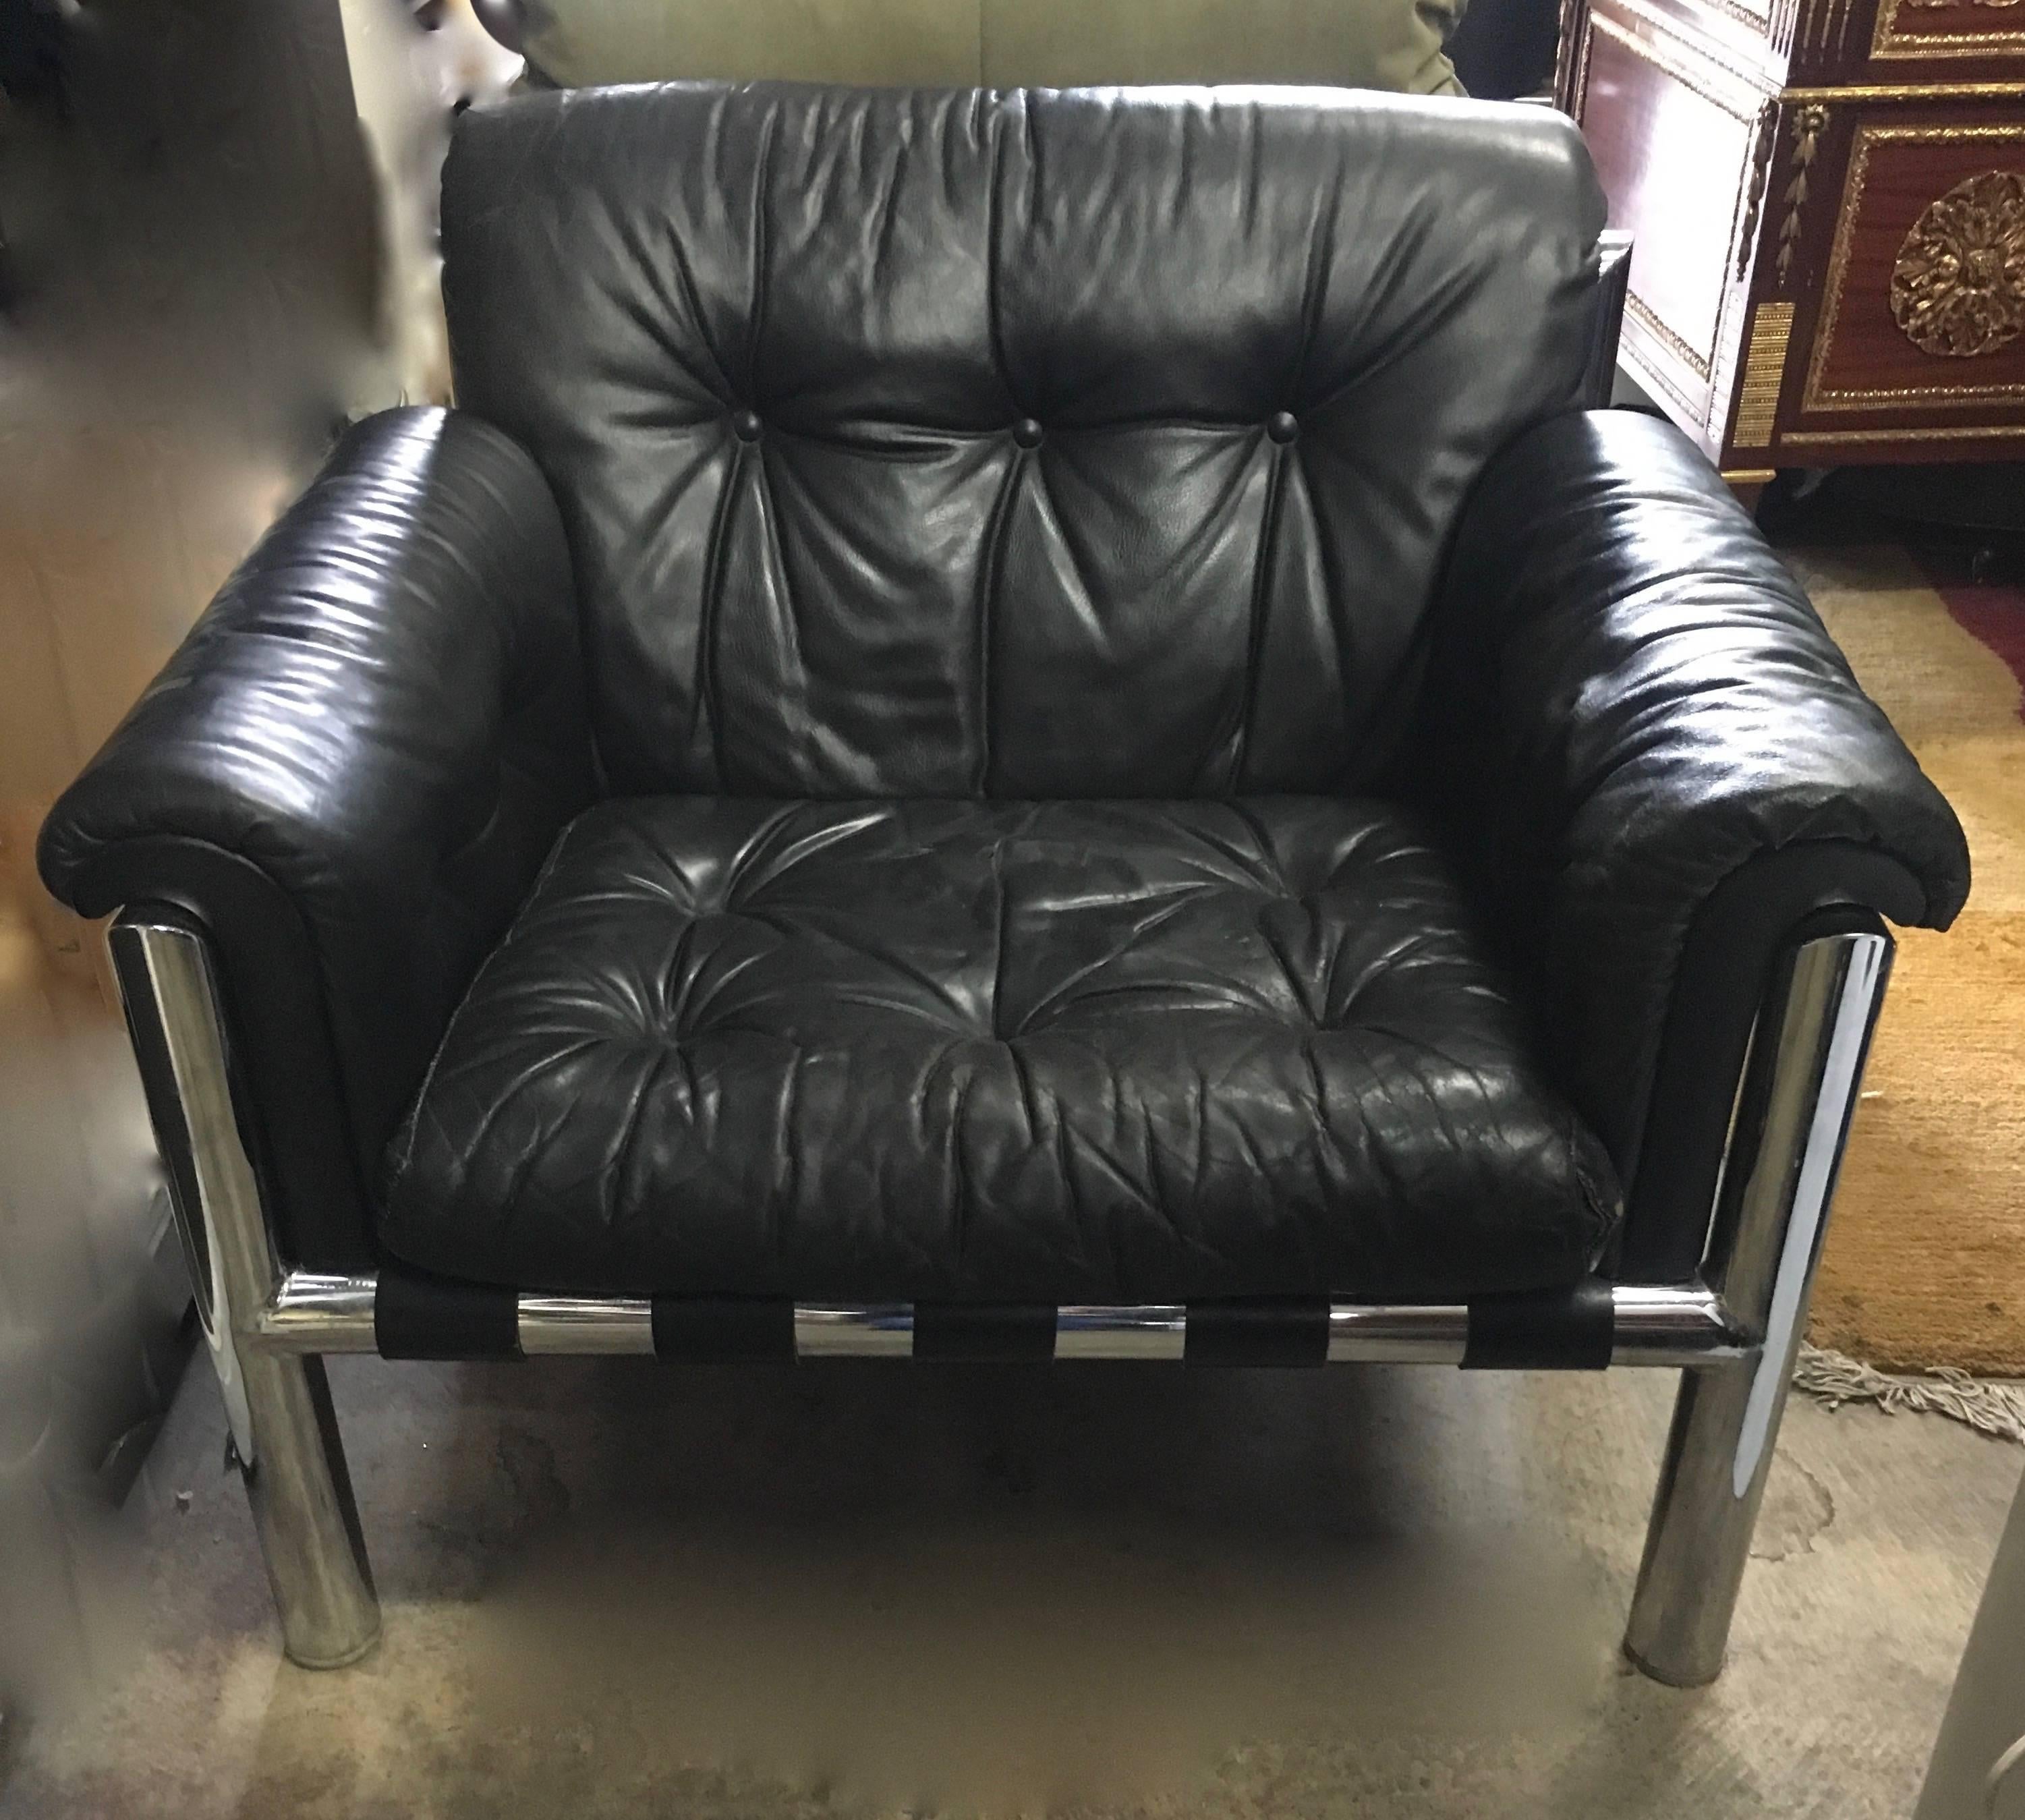 Pair of leather lounge chairs - wide and deep = comfortable. With chrome frames, this pair from the 1980s are both stunning and comfortable and in terrific vintage condition.